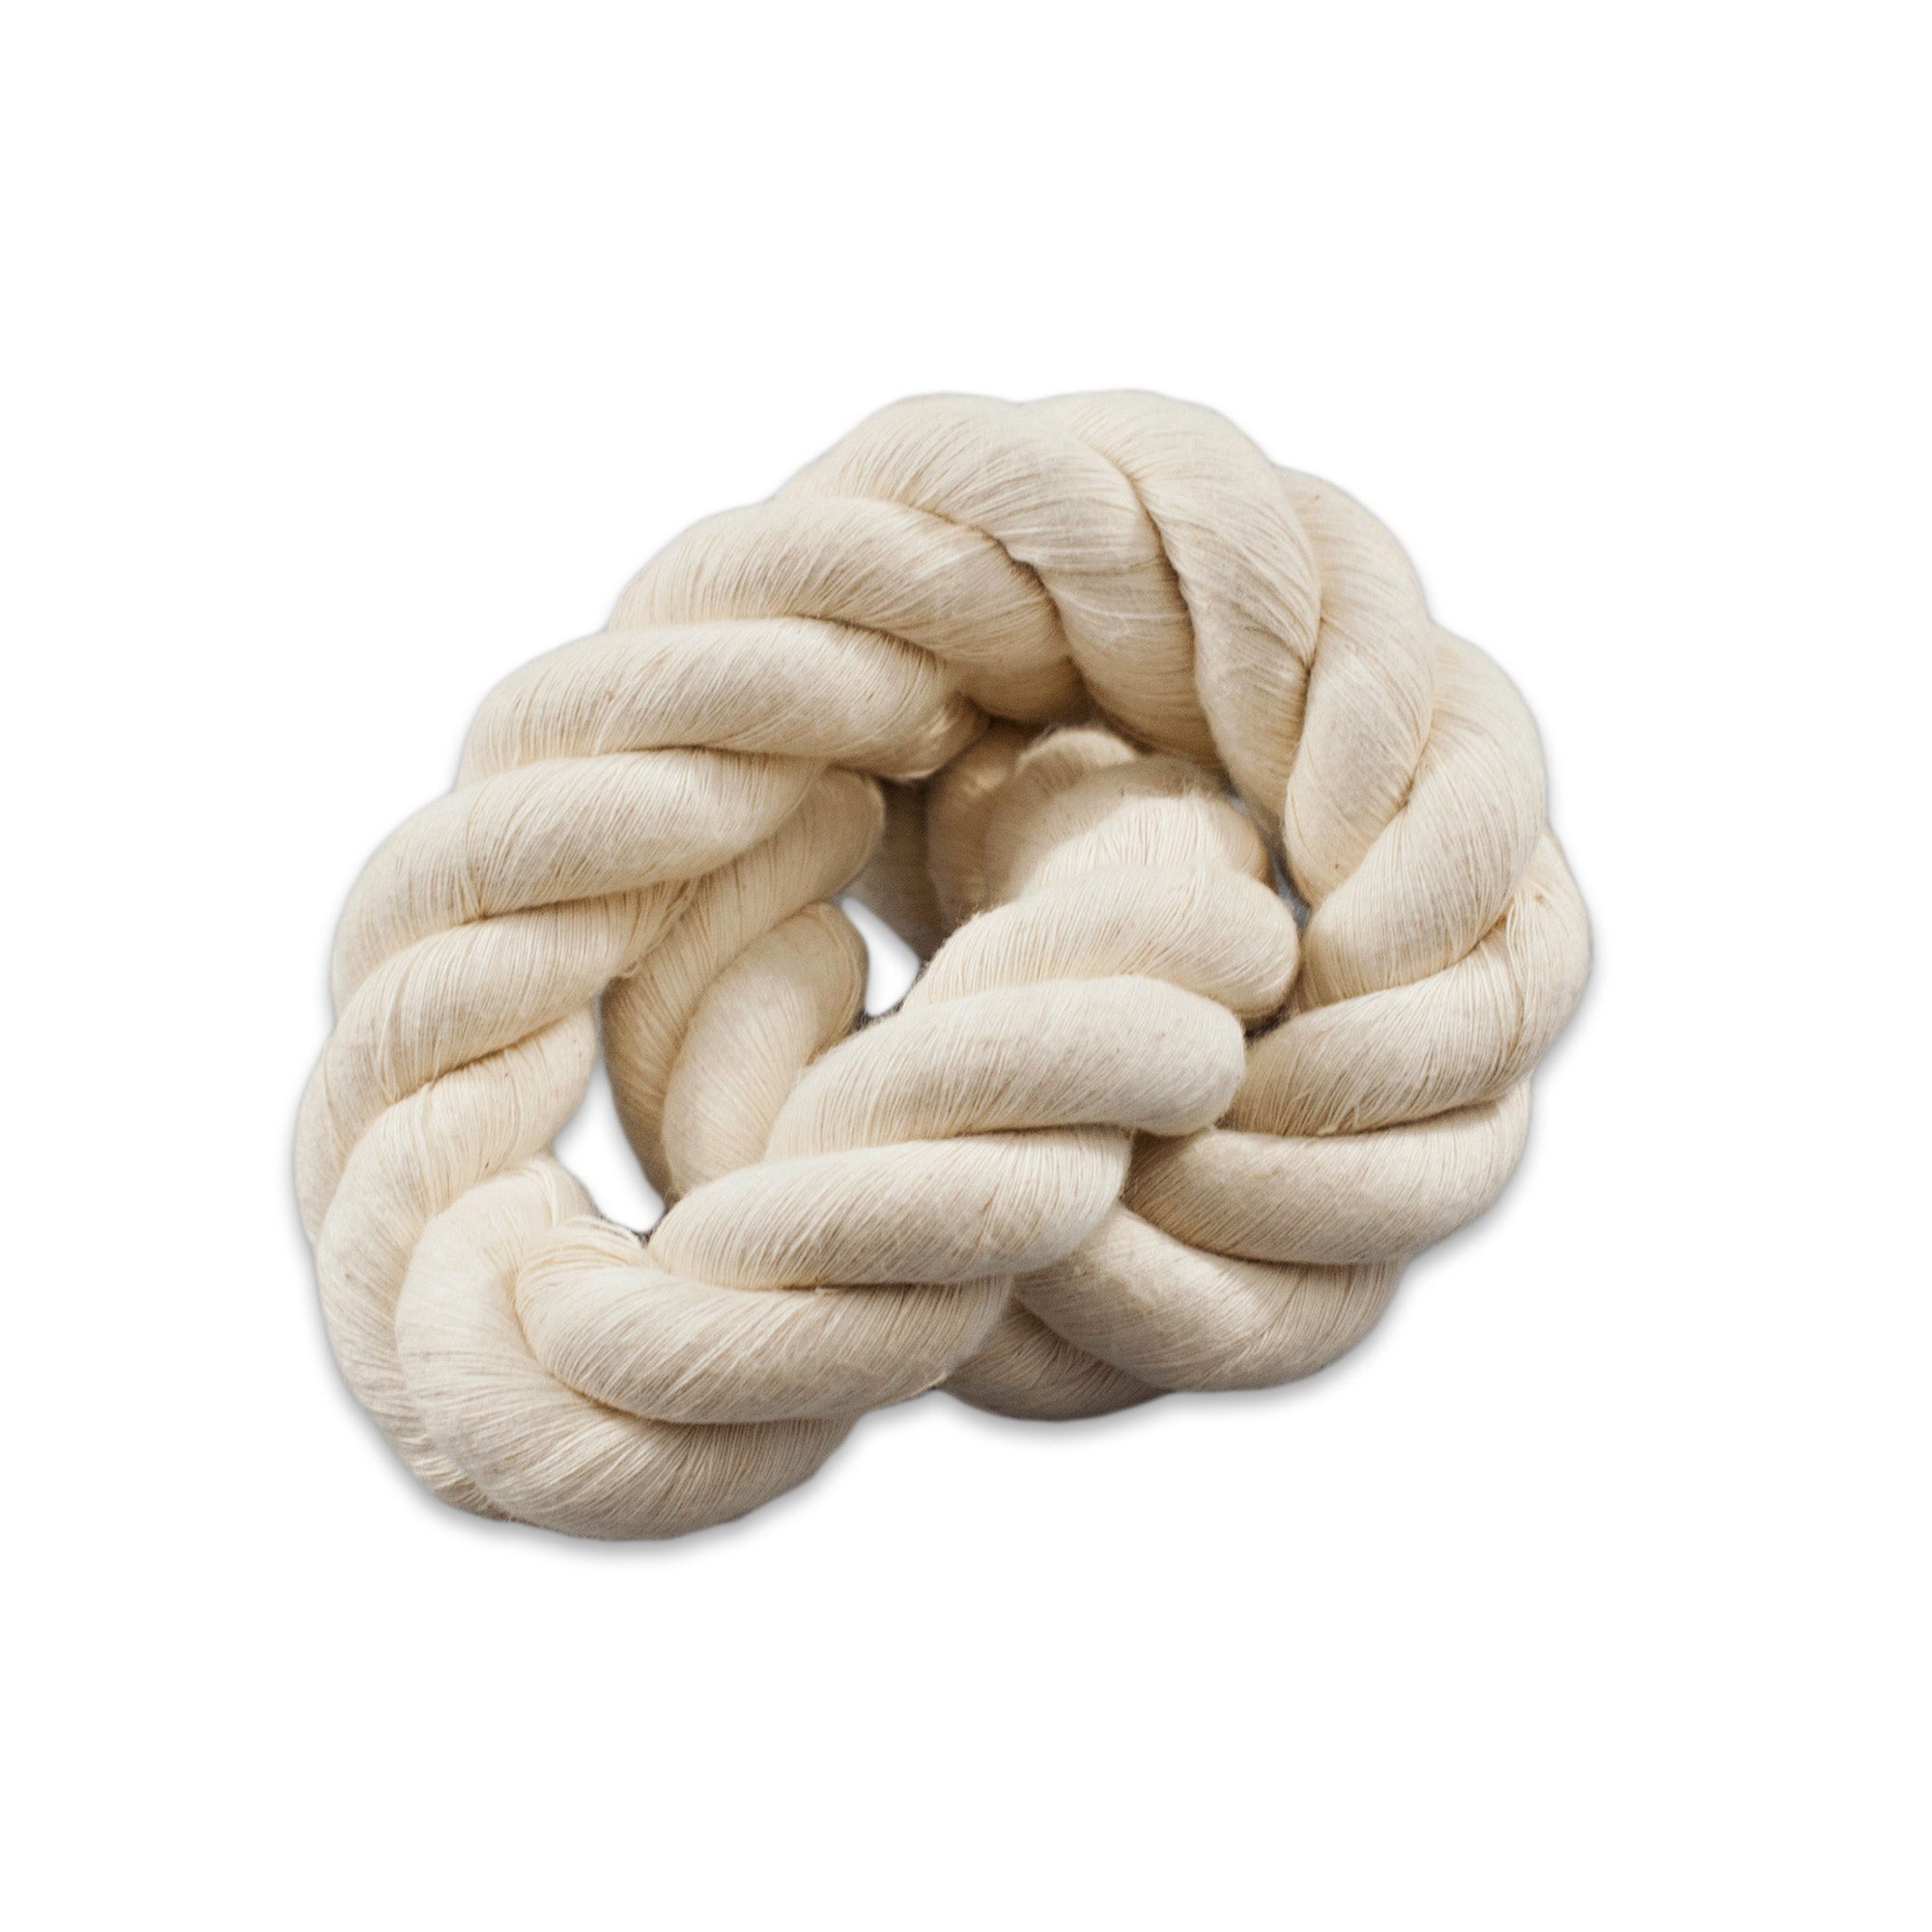  Twisted Natural Cotton Rope - 1/4 Inch - Solid Colors